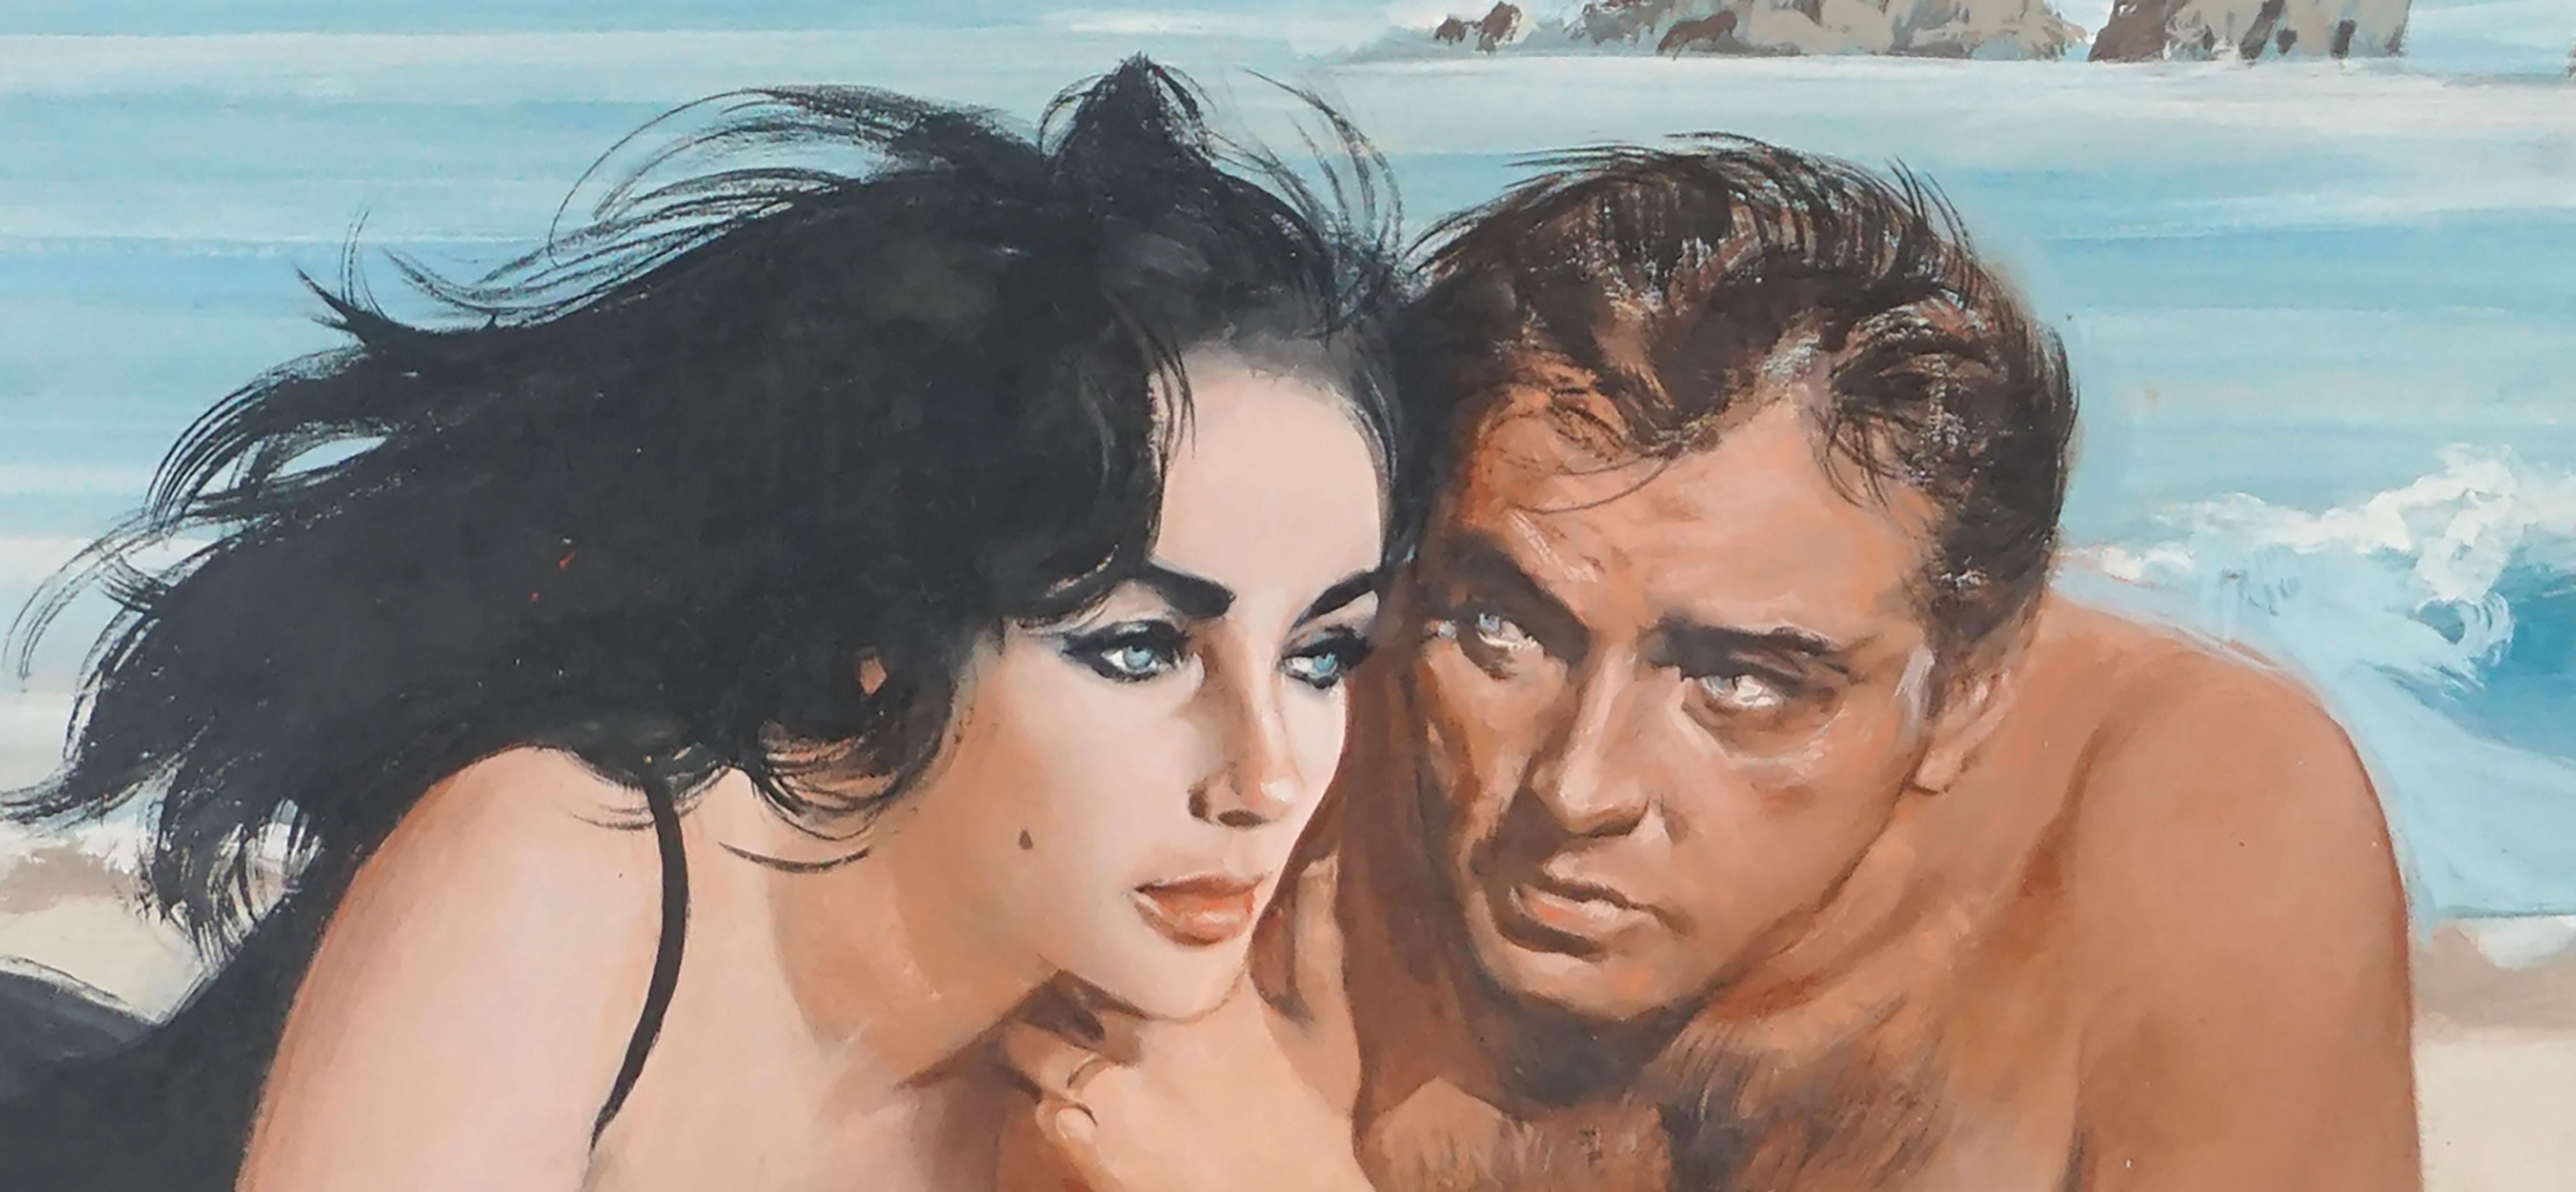 how old was elizabeth taylor in the sandpiper